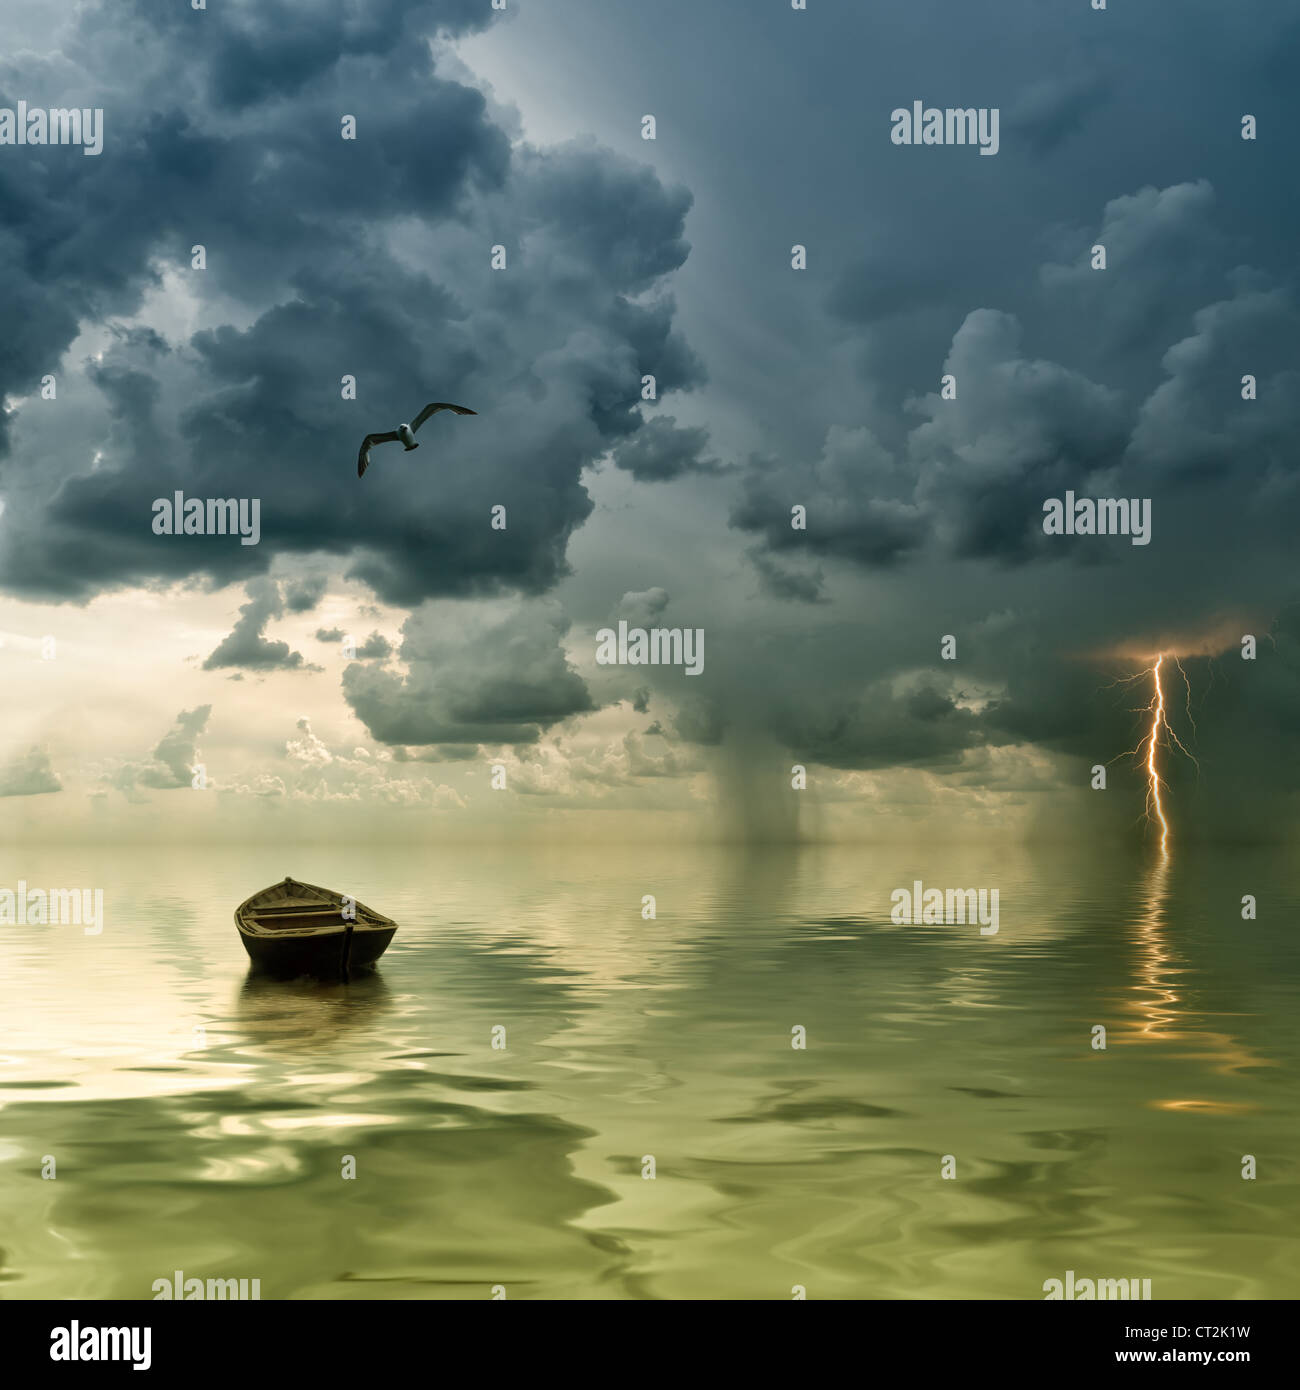 The lonely old boat at the ocean, comes nearer a thunder-storm with rain and lightning on background Stock Photo